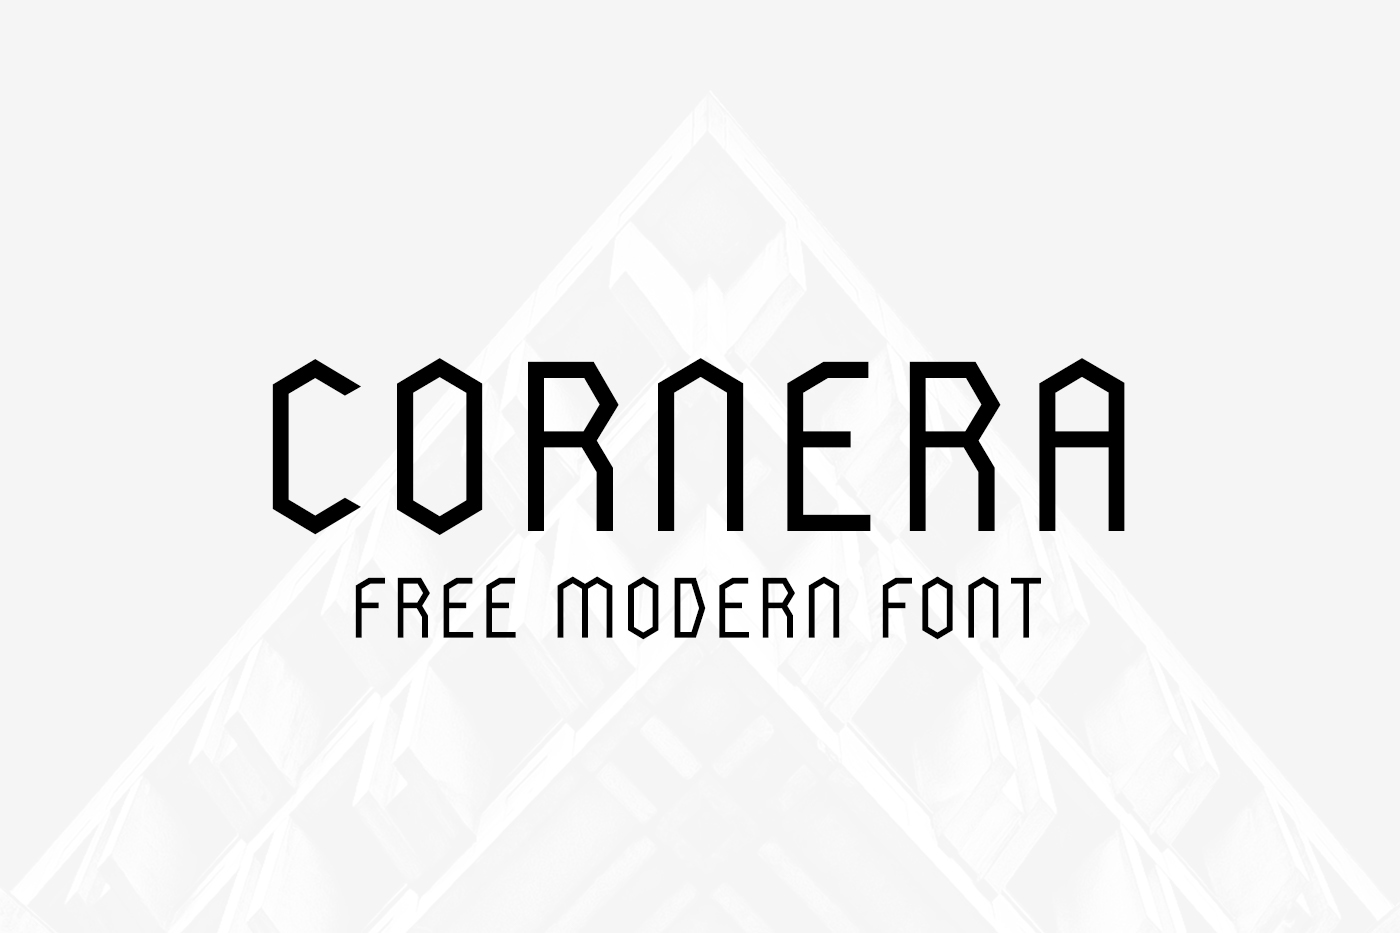 font otf WOFF free modern Typeface letters clean angle corner